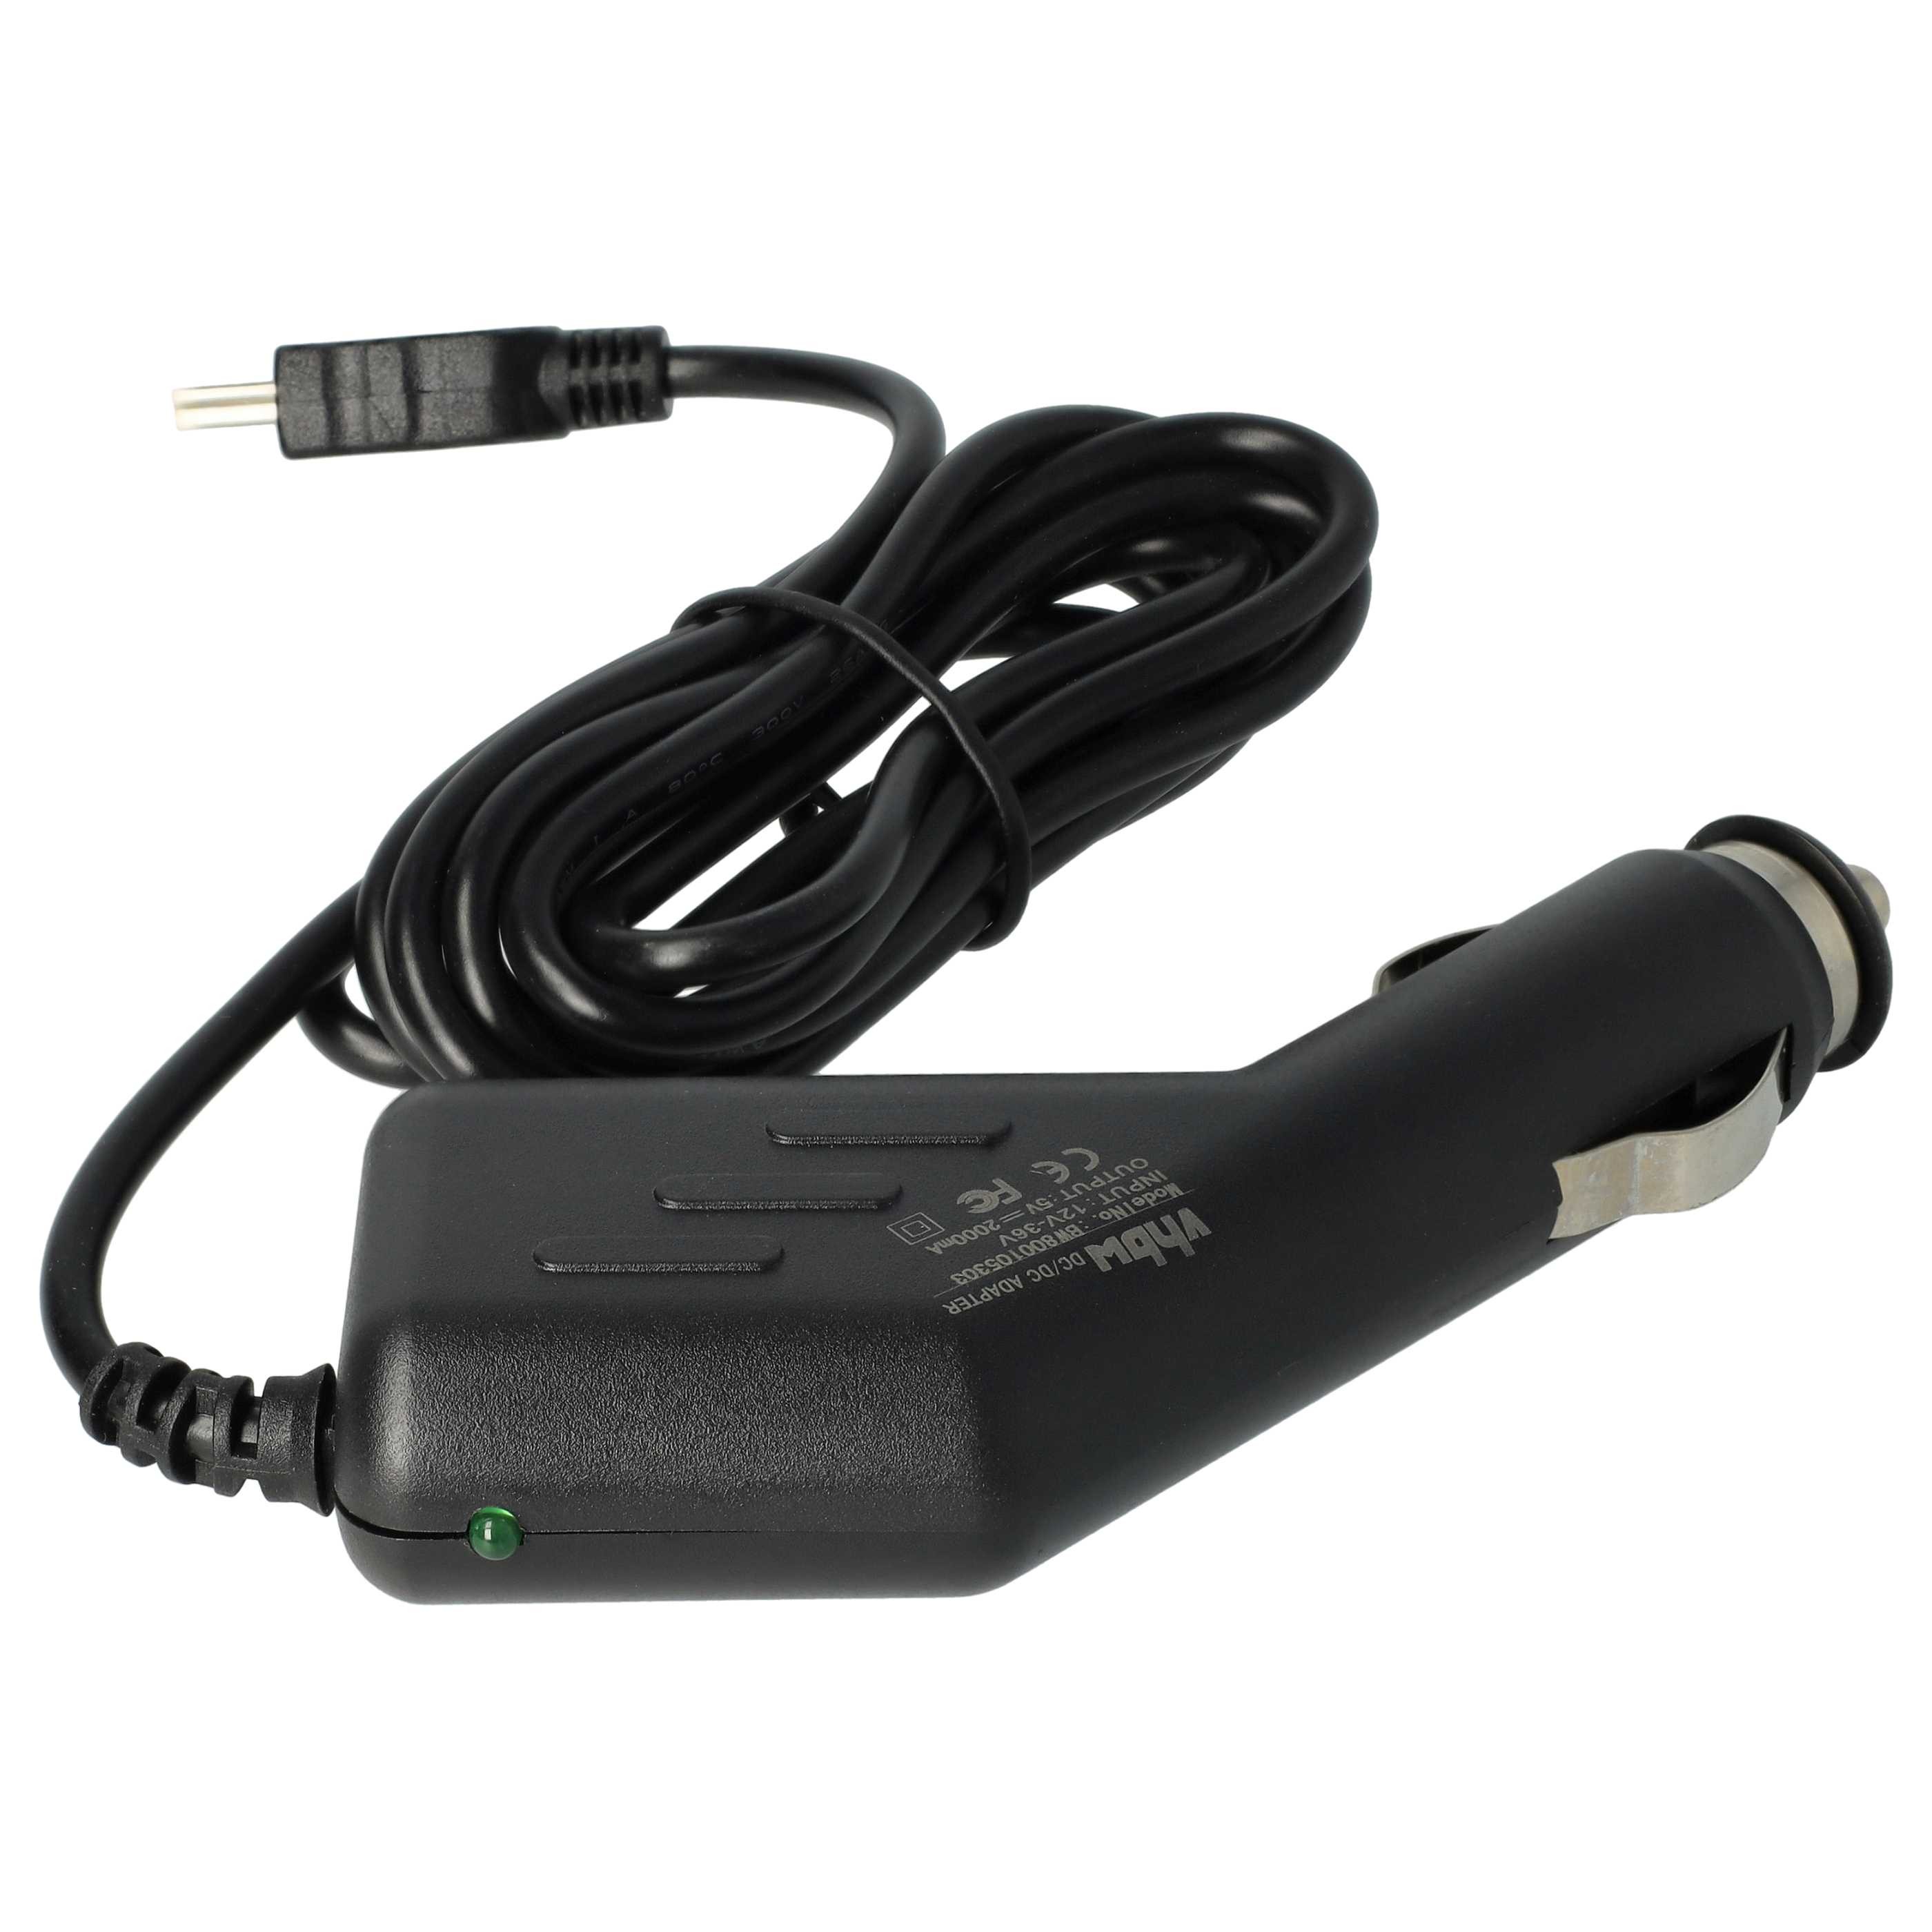 Mini-USB Car Charger Cable 2.0 A suitable forDevices like GPS, Sat Navs